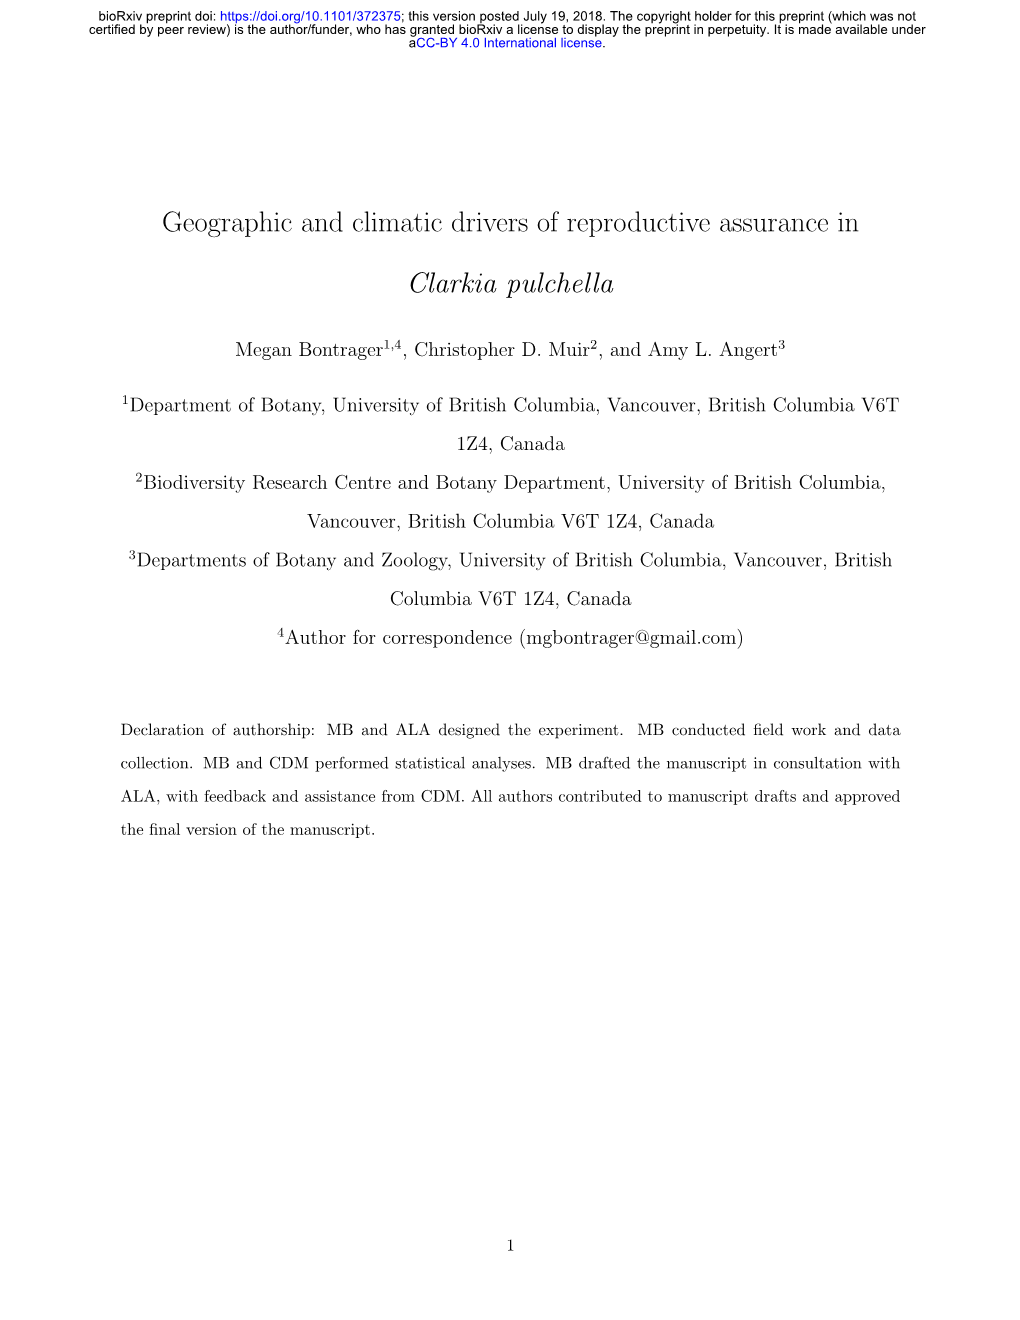 Geographic and Climatic Drivers of Reproductive Assurance in Clarkia